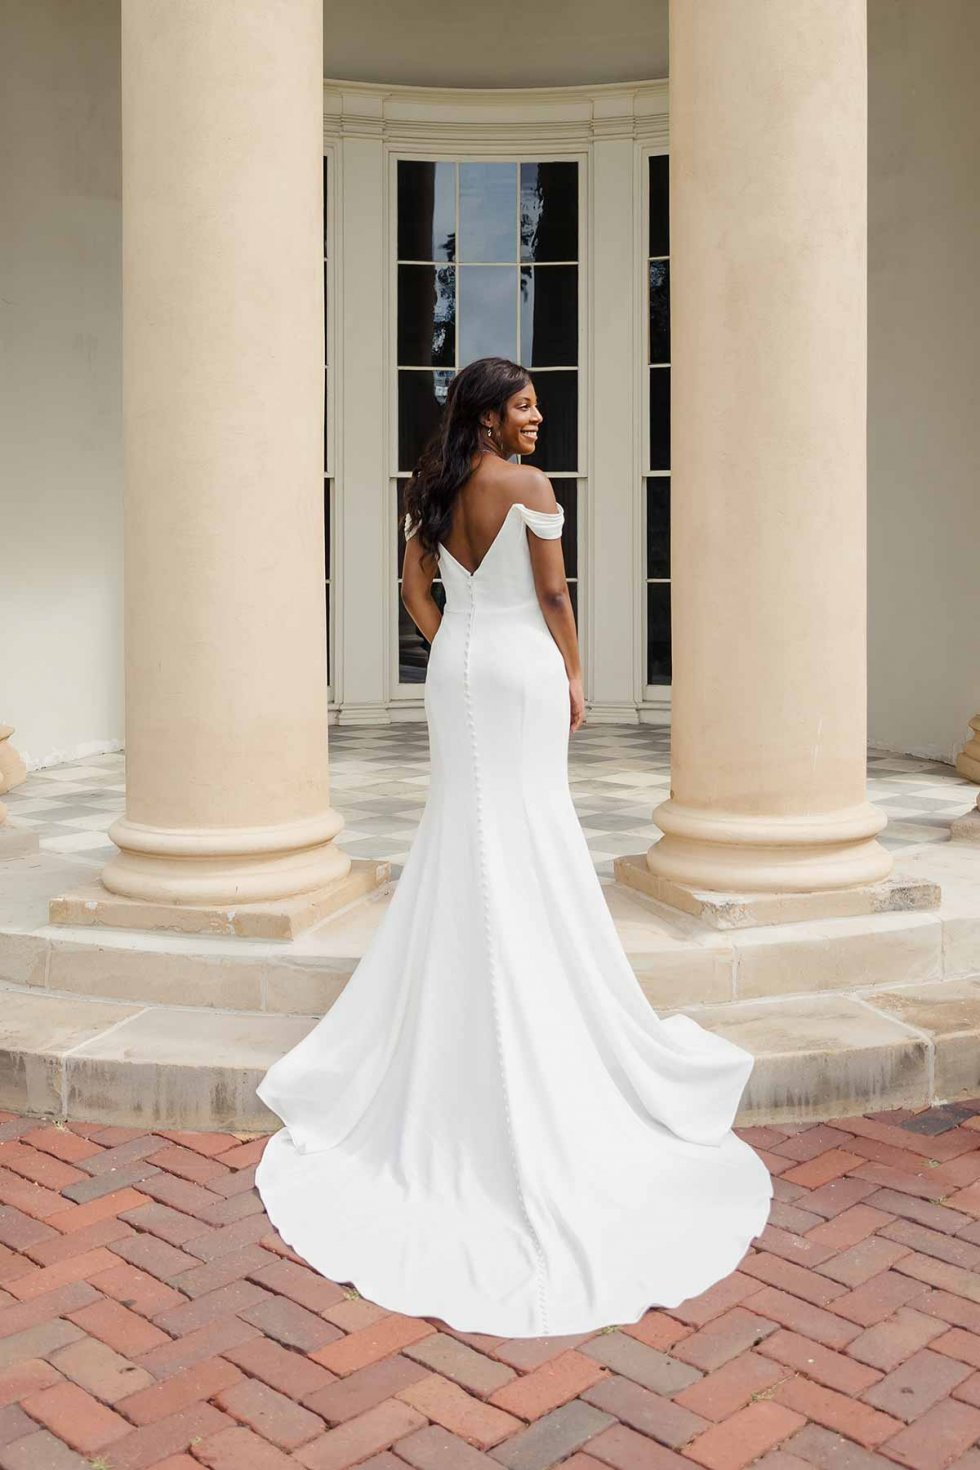 Simple and elegant fit & flare wedding dress with contour seaming and silhoutte shape